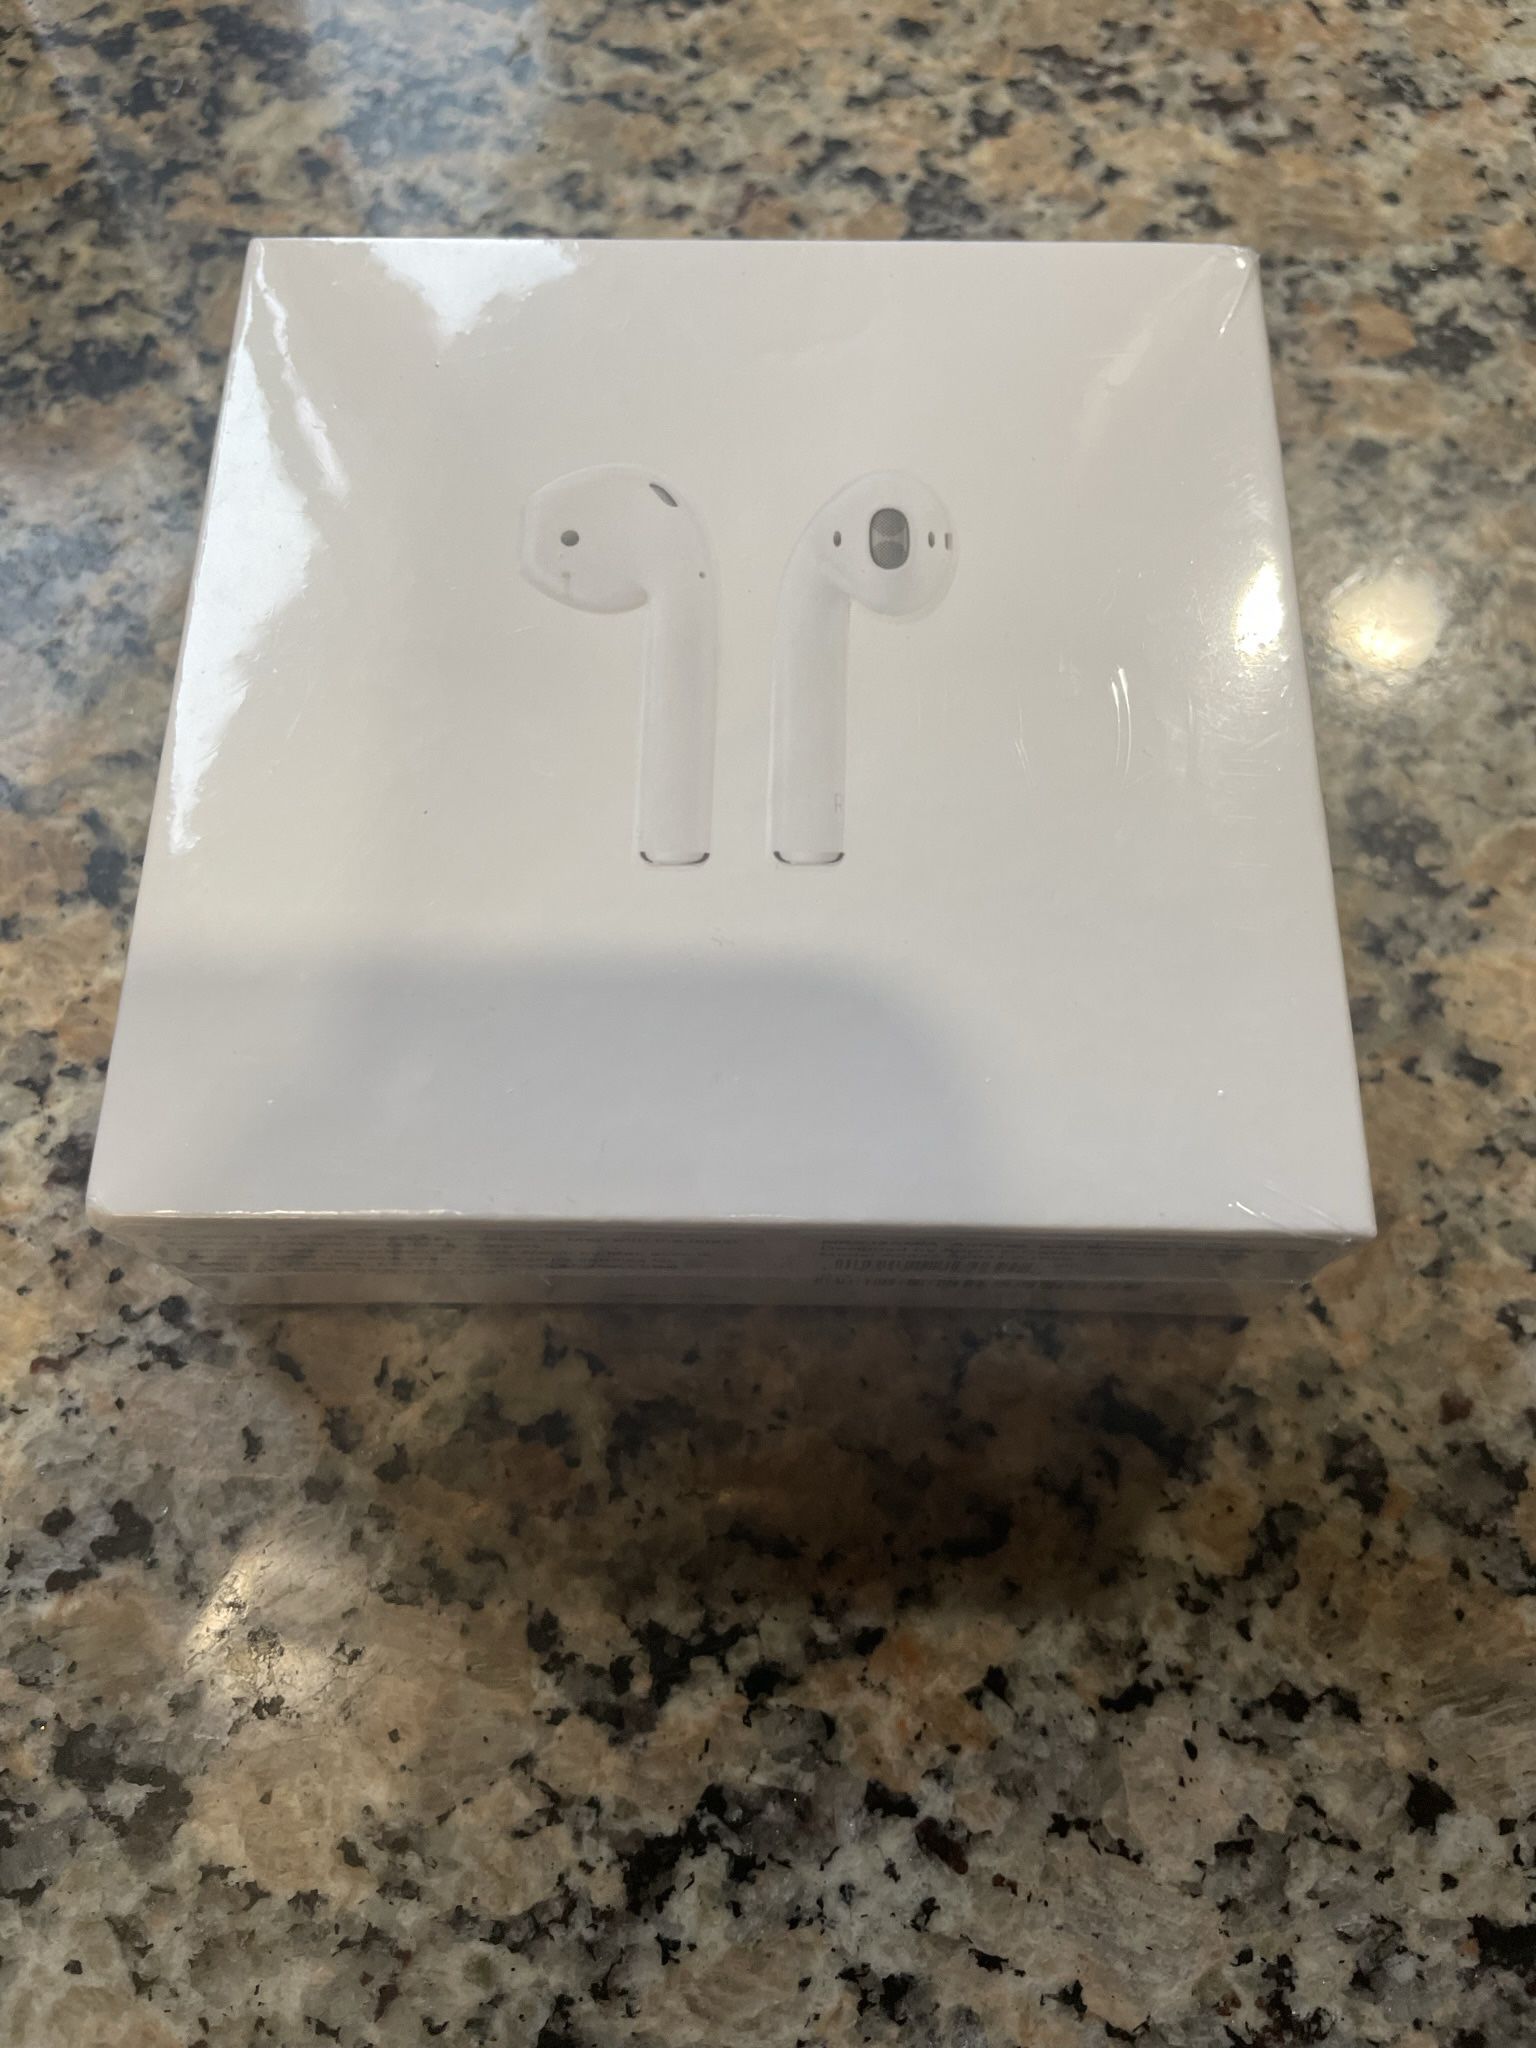 Apple airpods 2nd generation 